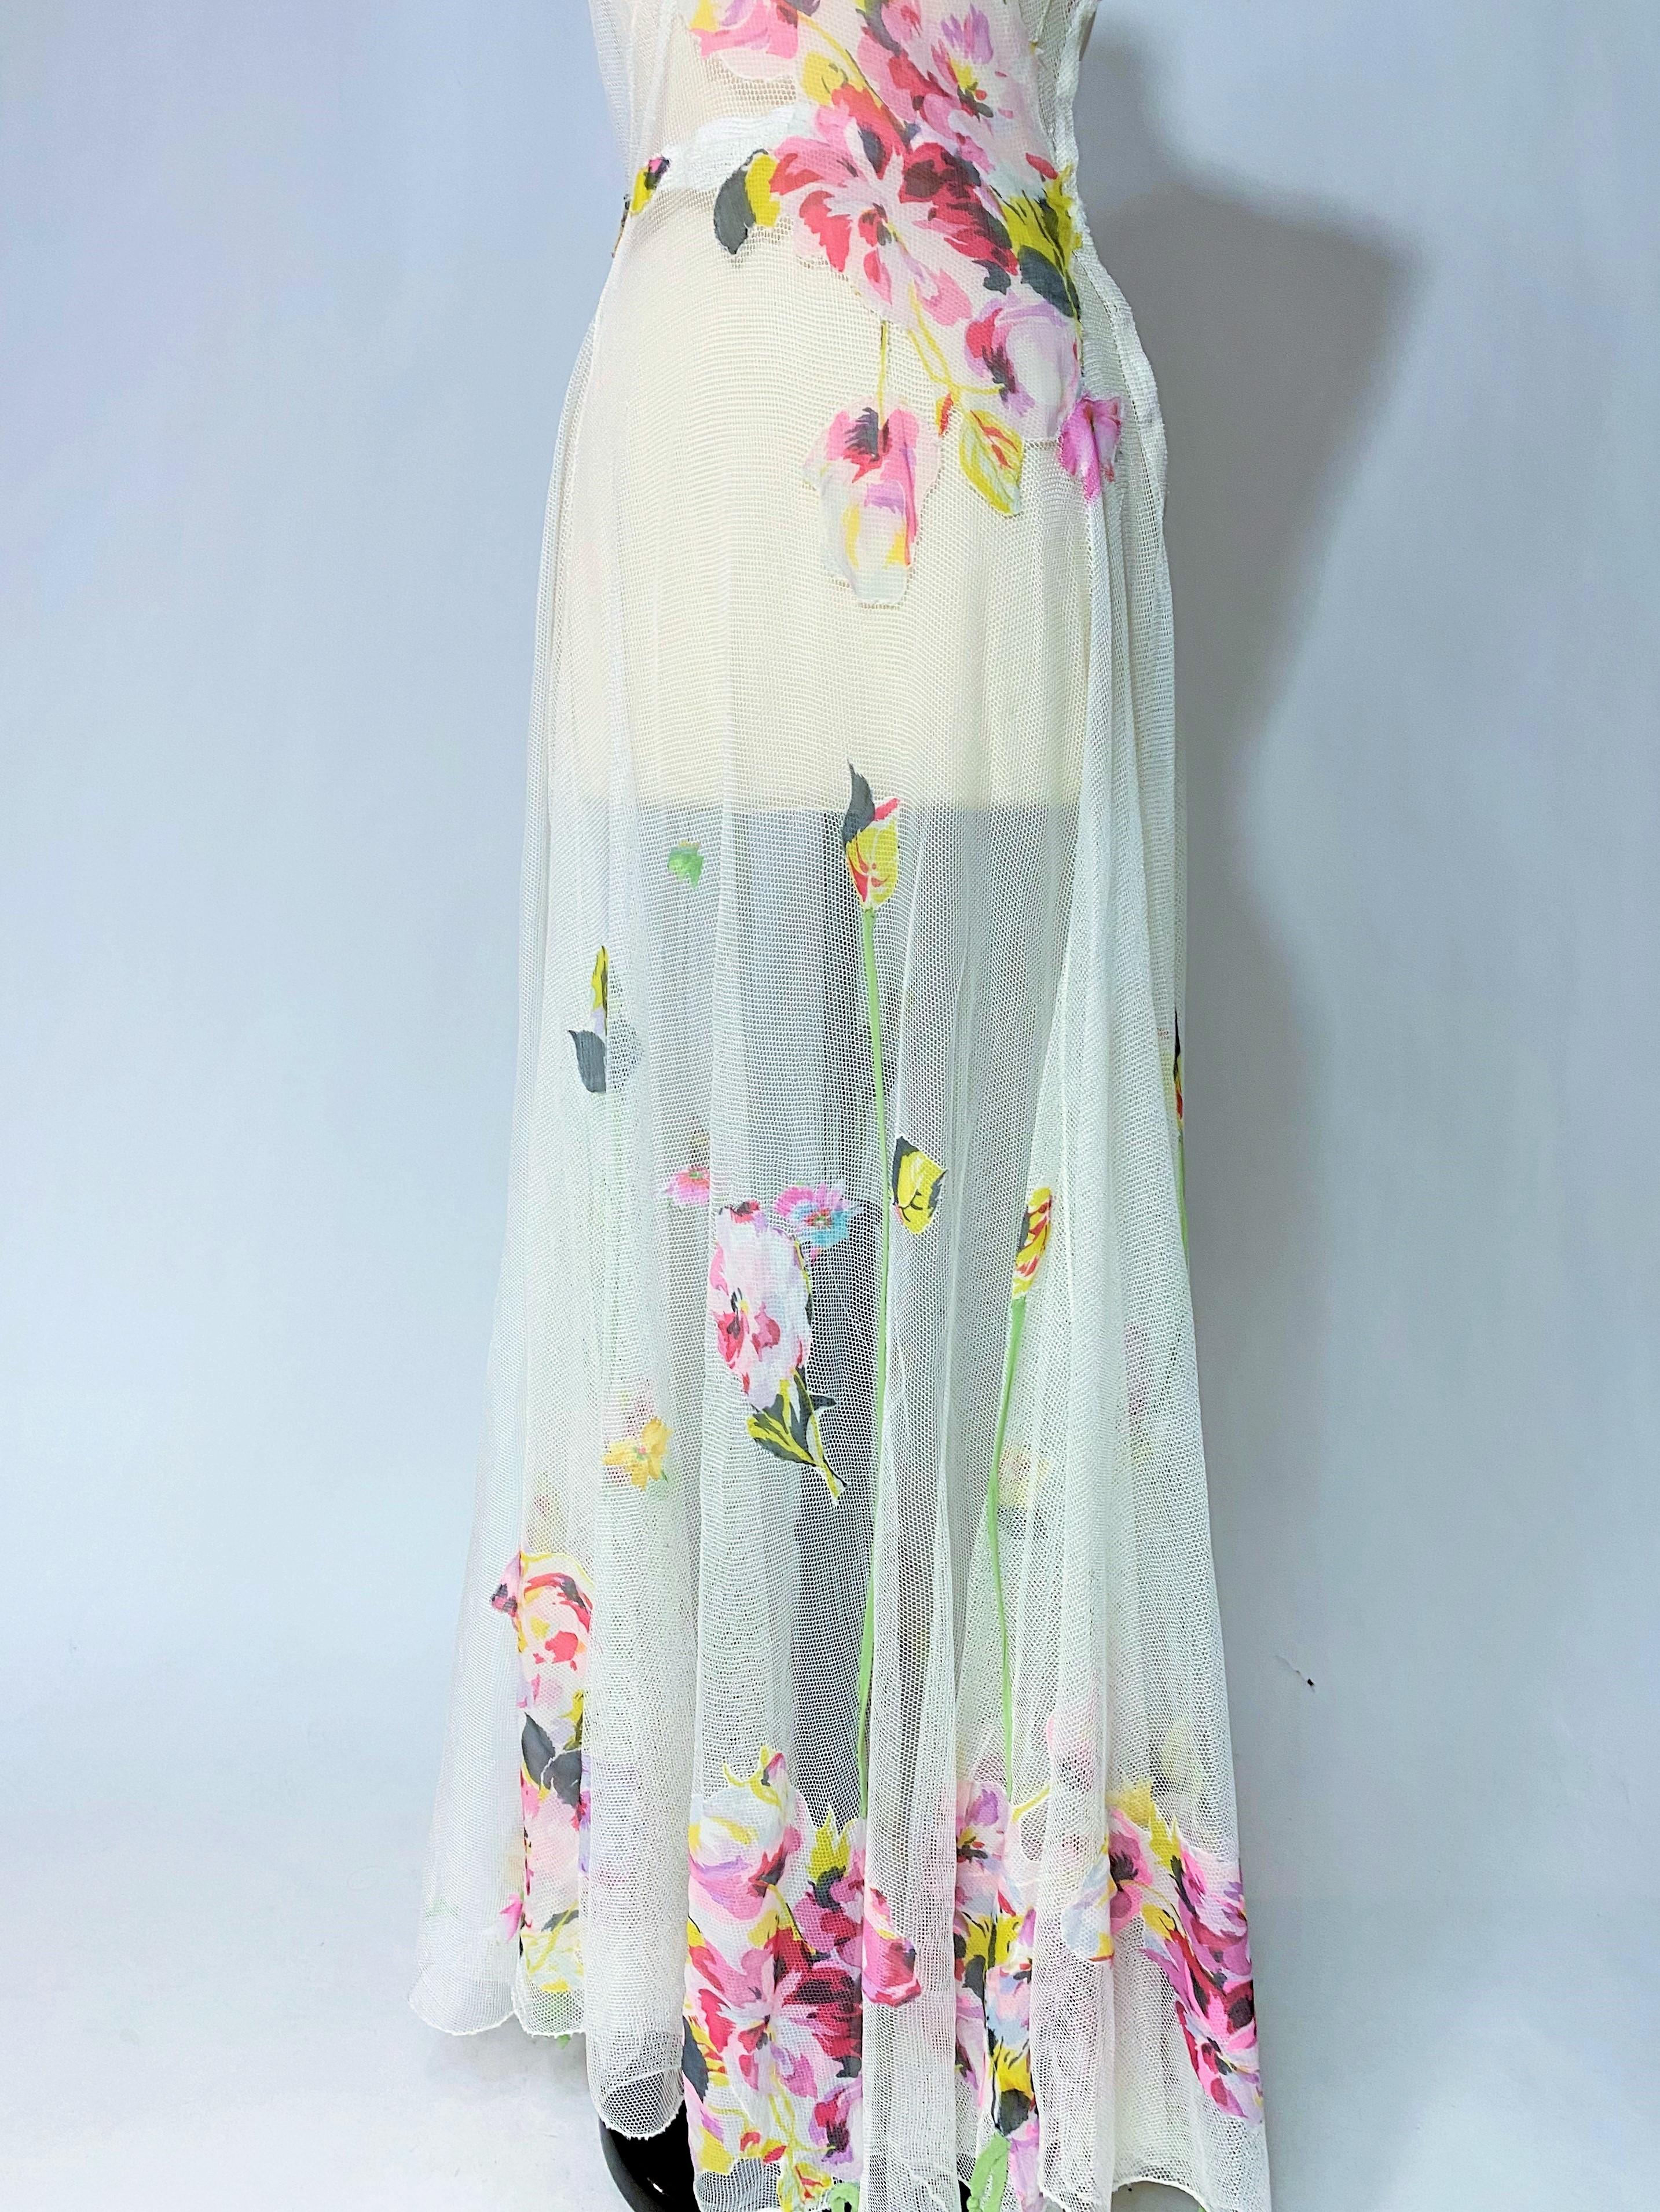 A Romantic Dress in white cotton Net applied with printed Chiffon Circa 1938 For Sale 6